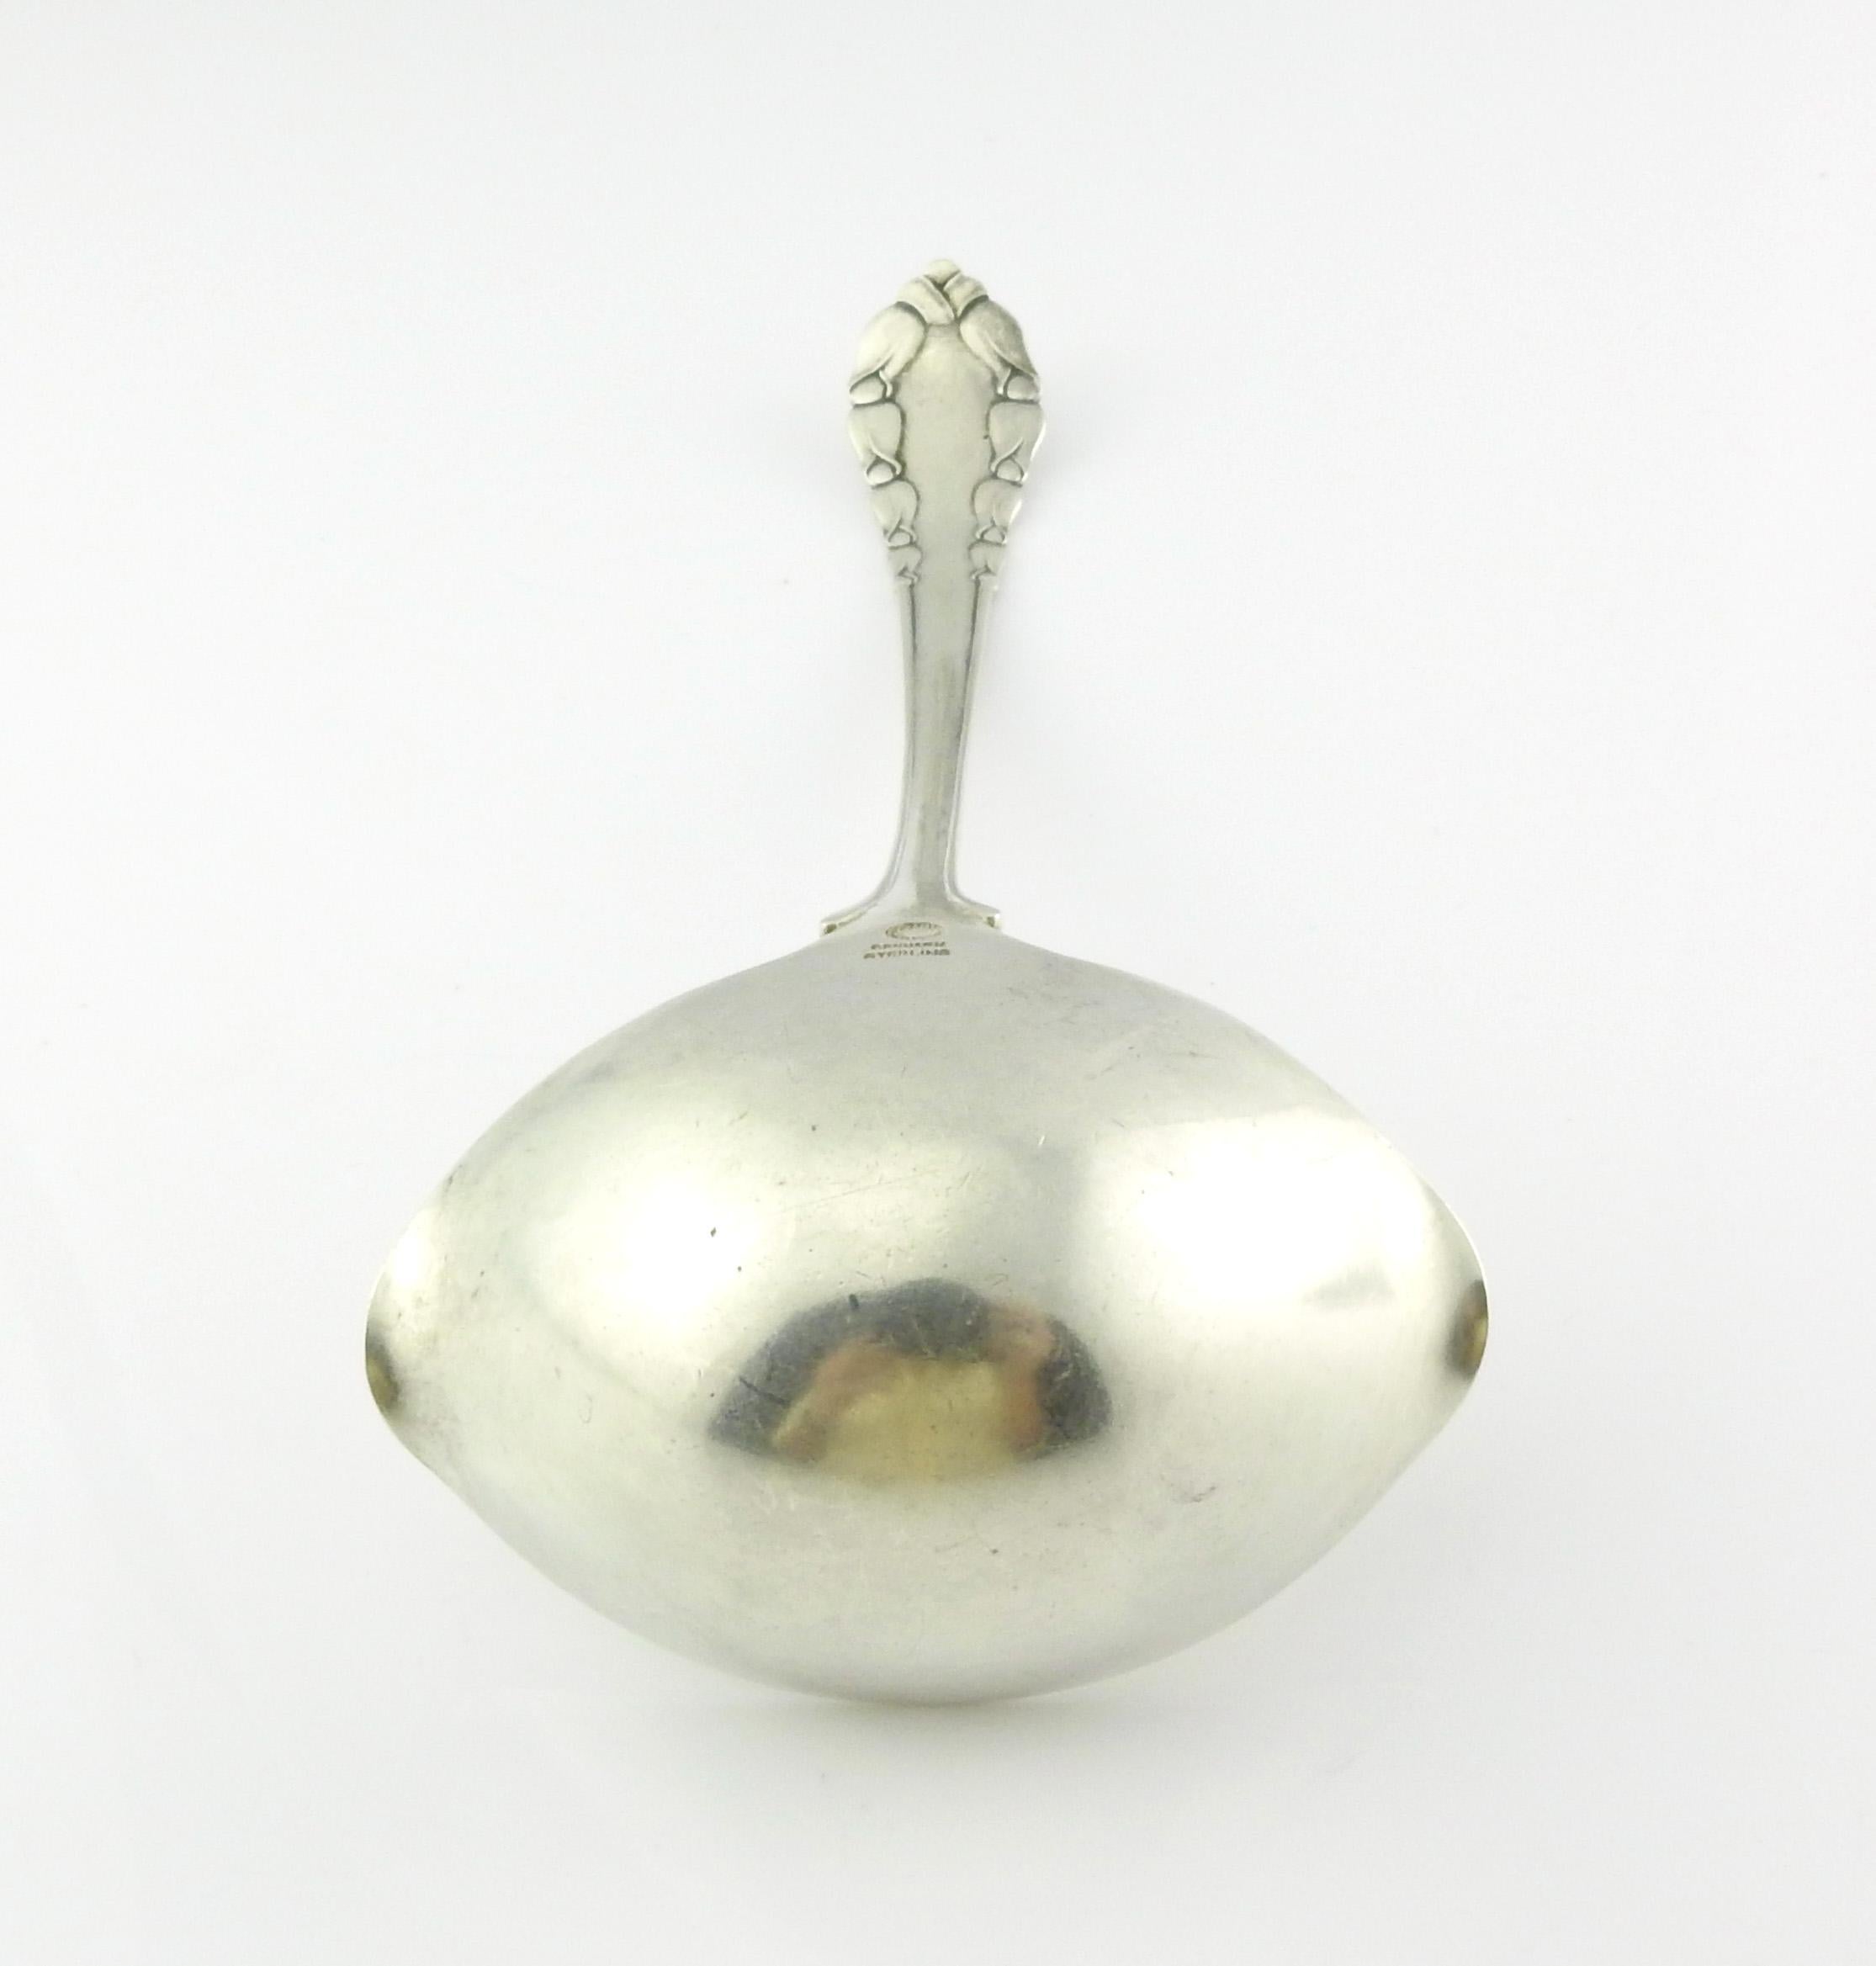 Georg Jensen Denmark 1913 Lily of the Valley Solid Gravy Ladle 2